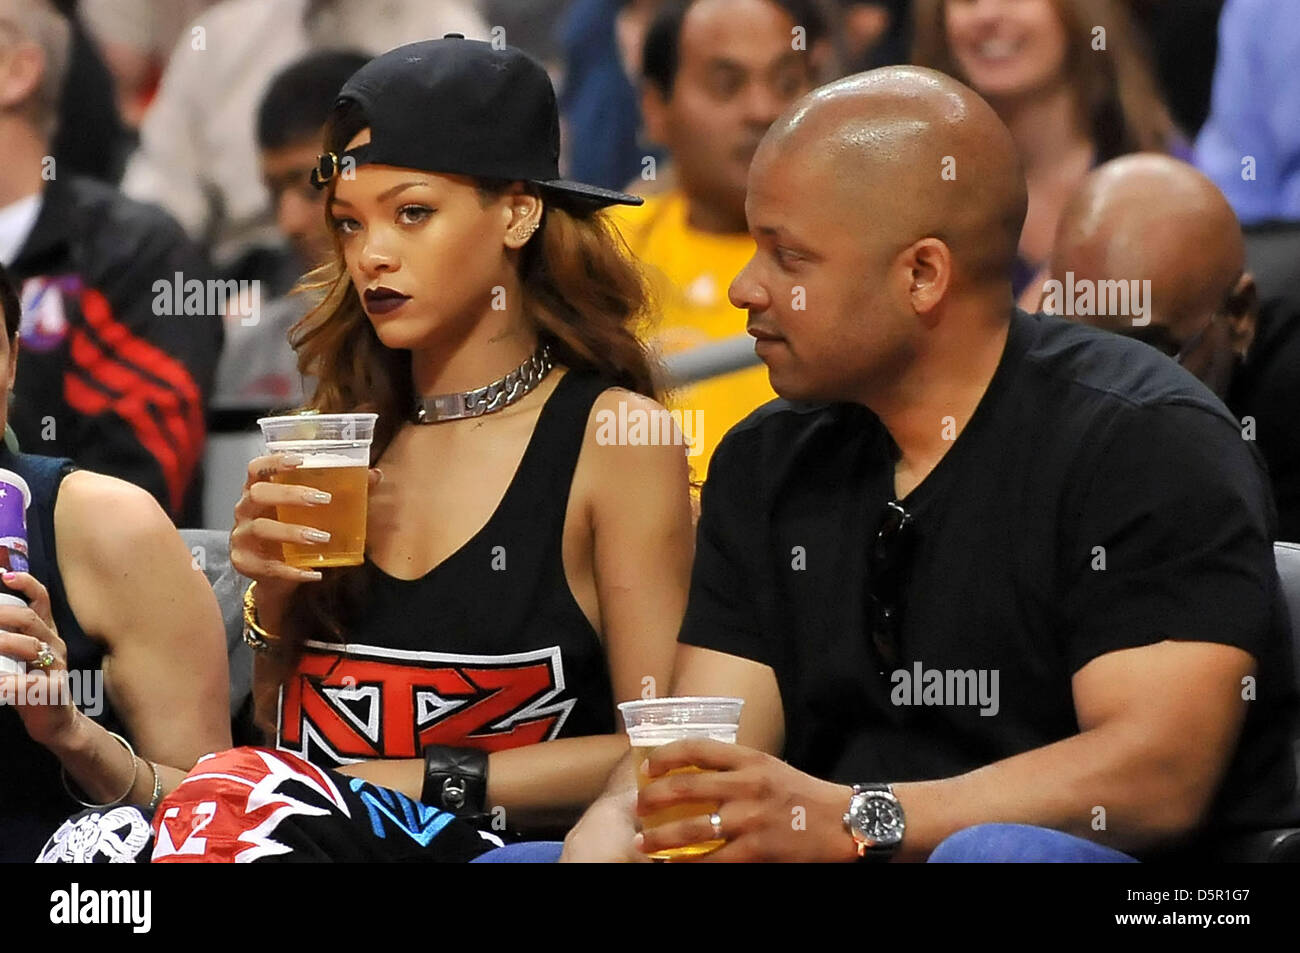 Los Angeles, California, USA. 7th April 2013. R&B Recording Artis Rihanna Robyn Fenty attends the NBA Basketball game between the Los Angeles Lakers and the Los Angeles Clippers at Staples Center in Los Angeles, California..The Los Angeles Clippers defeat the Los Angeles Lakers 109-95.Louis Lopez/CSM/Alamy Live News Stock Photo